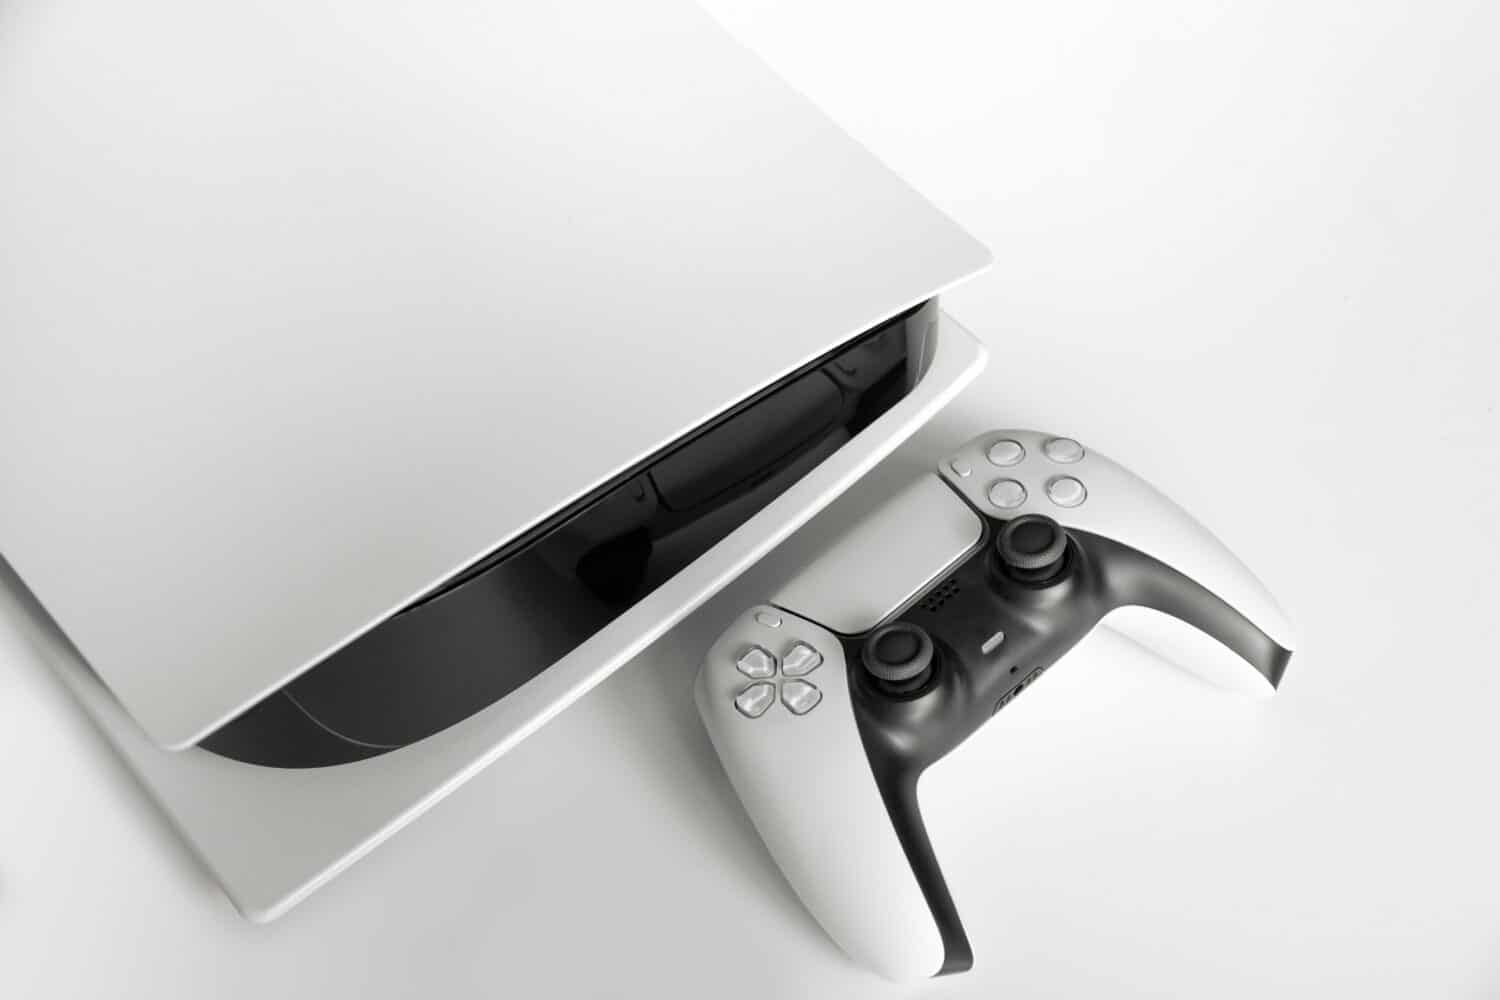 Next Generation game console and controller in close view